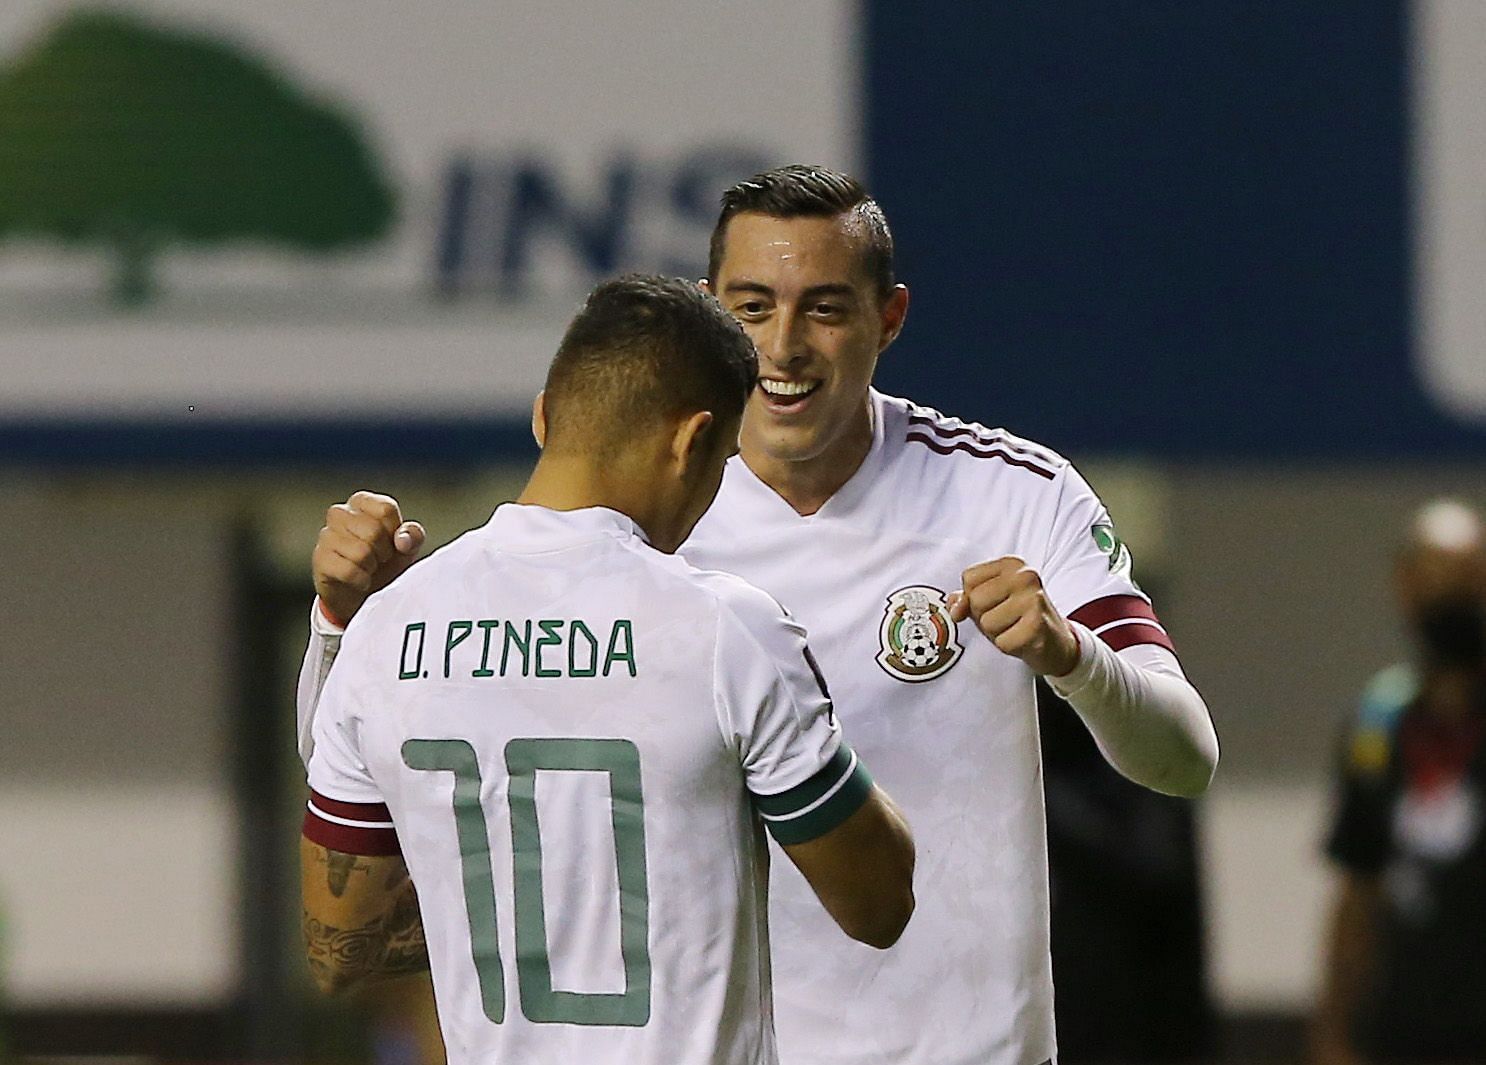 Mexico square off against Ecuador in a friendly fixture on Wednesday